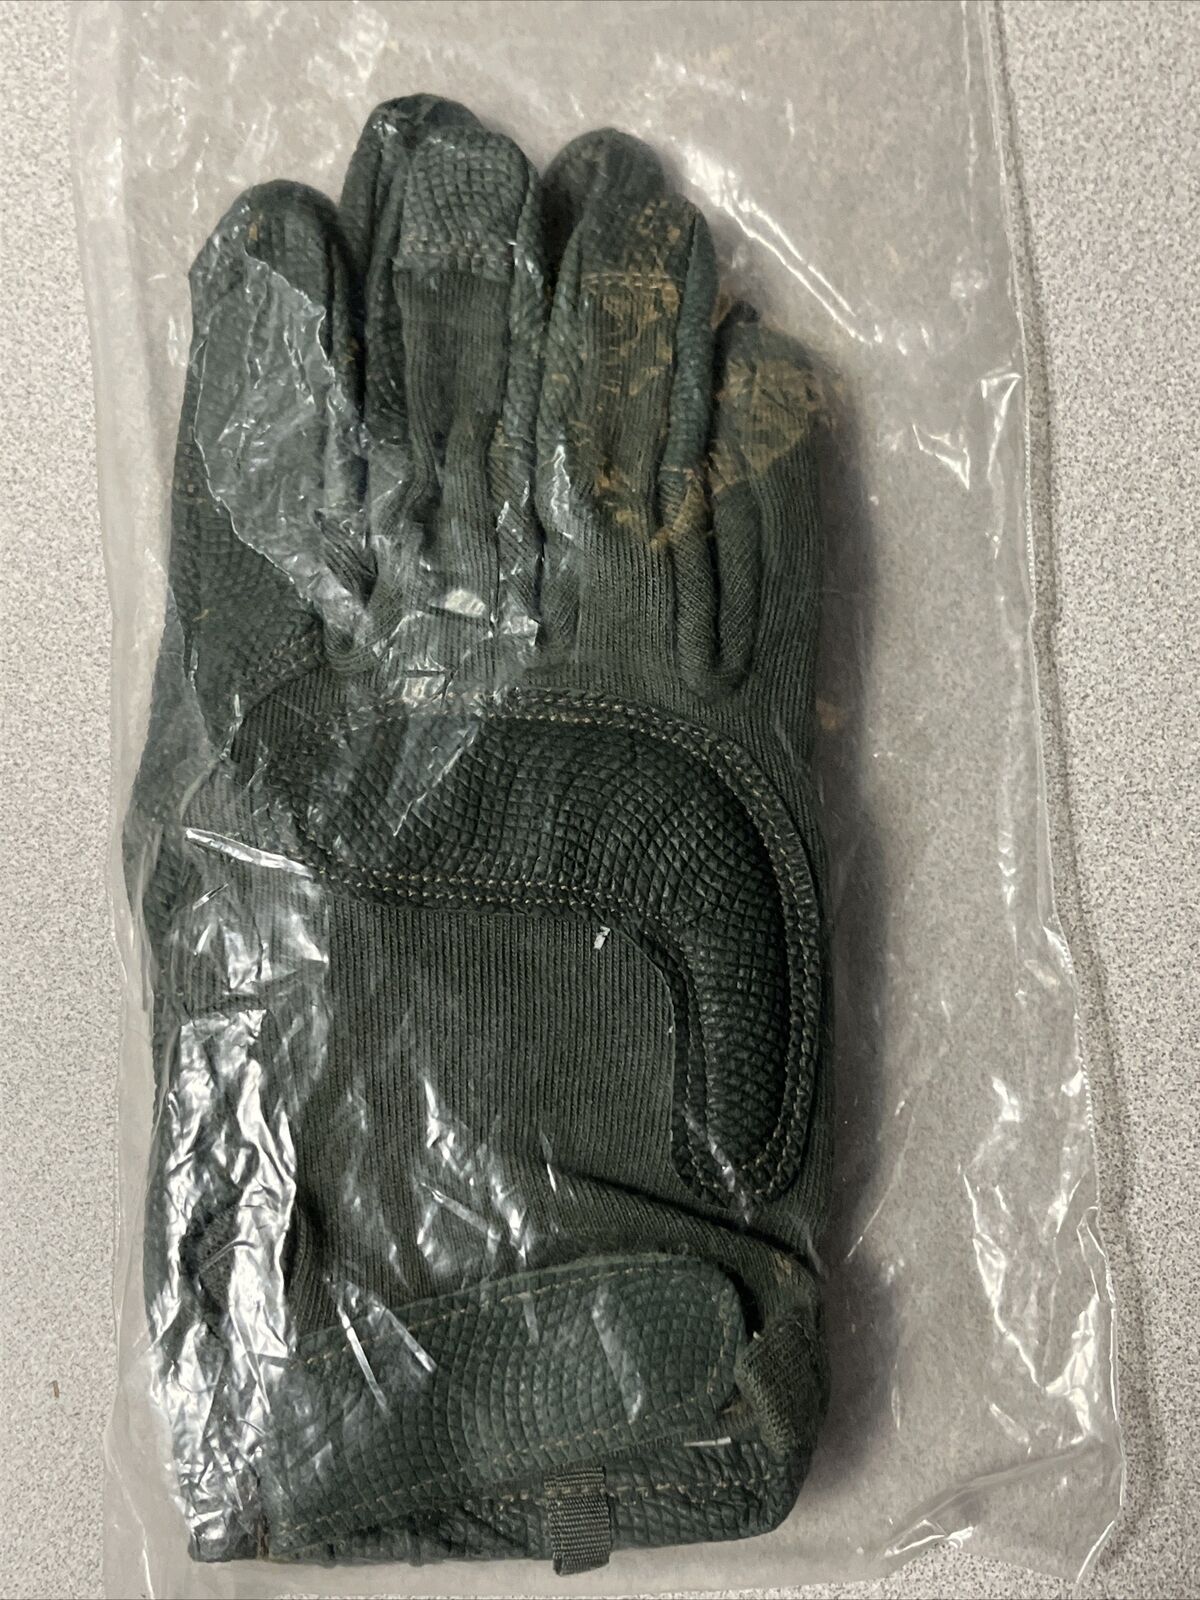 NWT, HWI, Army Combat Gloves, HHC-0014, Foliage Green, SMALL,   H/48   (mz)